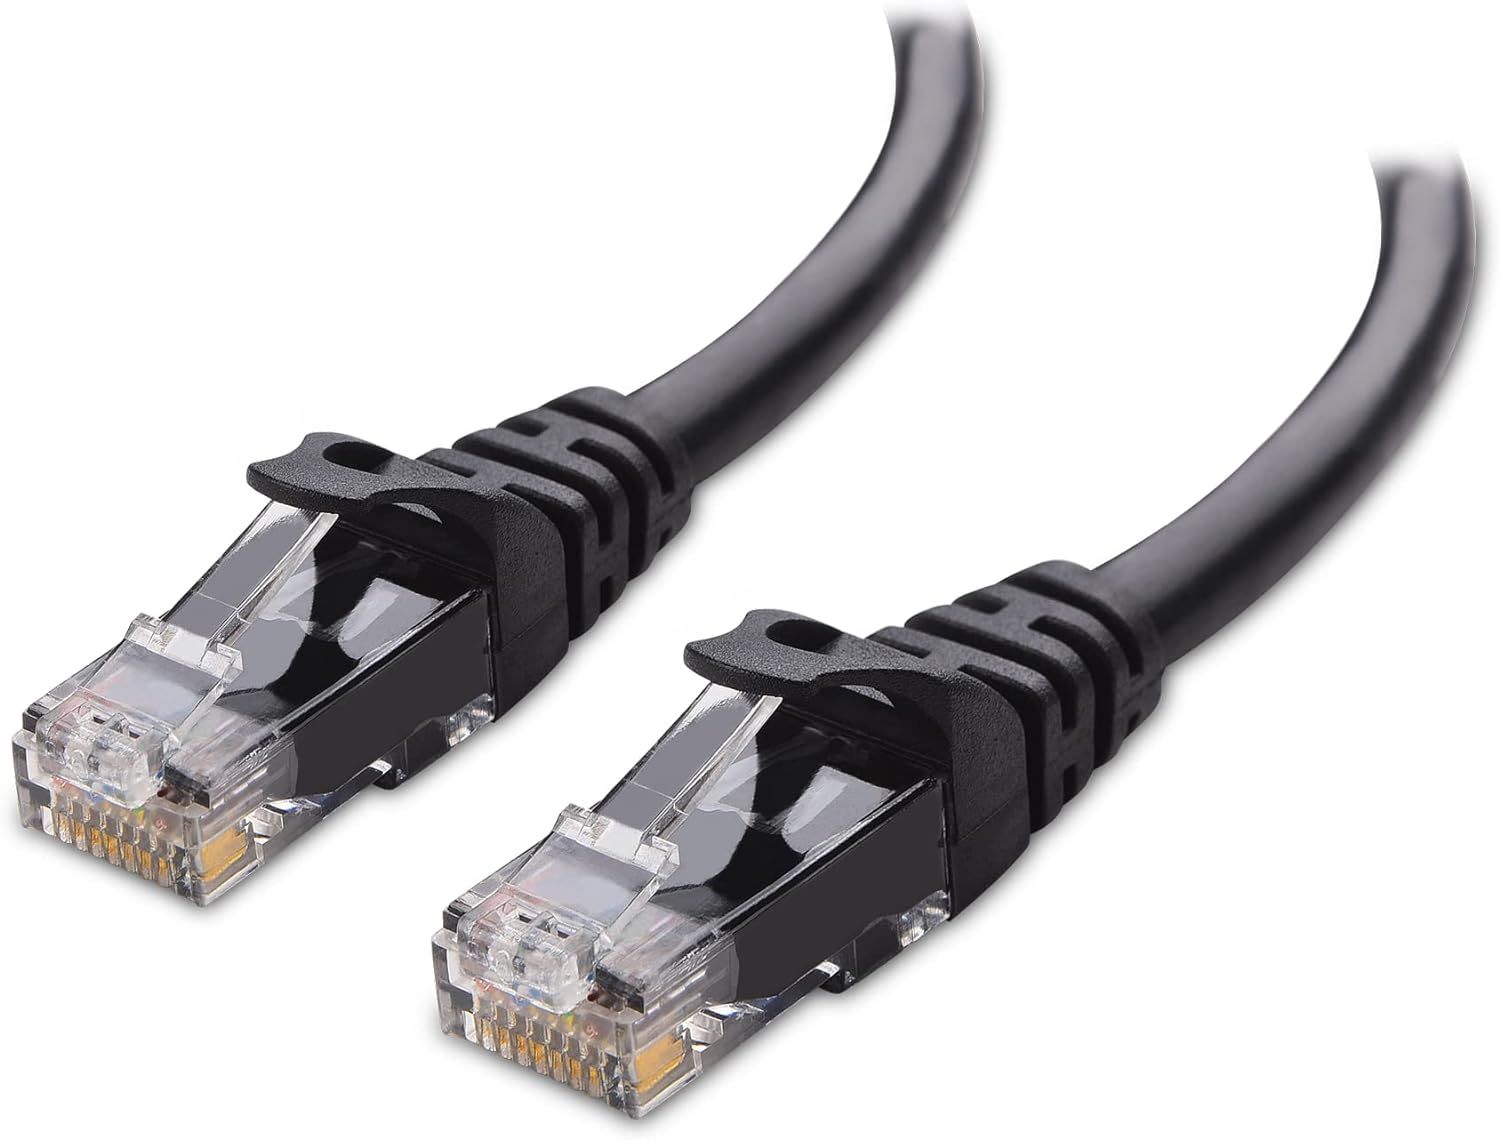 CAT 8 Ethernet Cable 10 ft Internet Cable for Router, Gaming, Xbox, Network  Adapters, PS5 